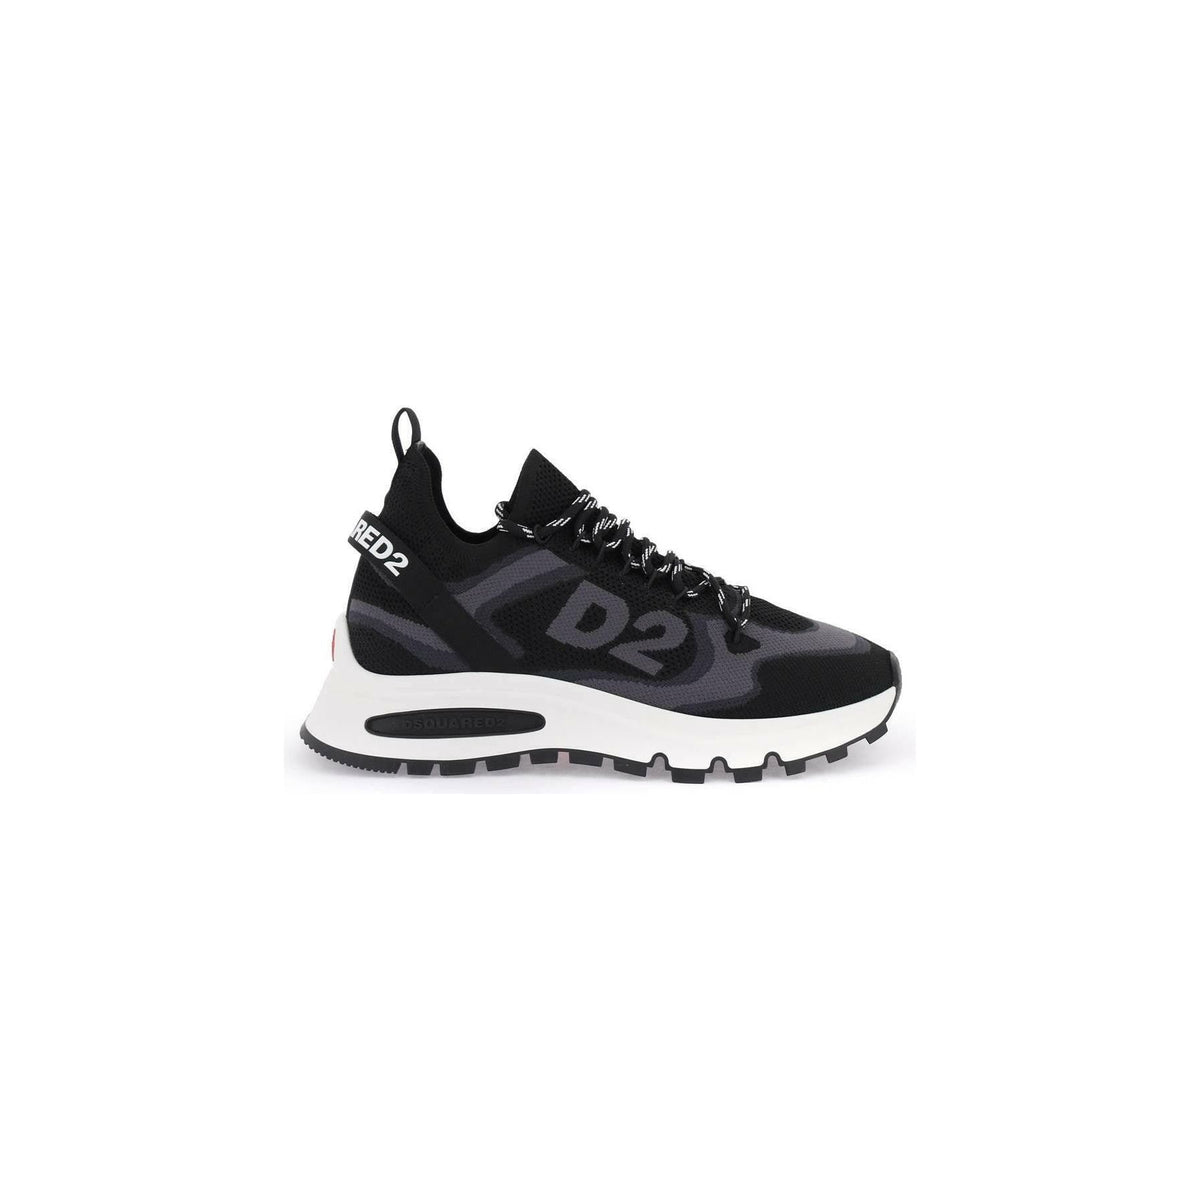 DSQUARED2 - Black Recycled Fabric Run Ds2 Sneakers With Jacquard Logo - JOHN JULIA